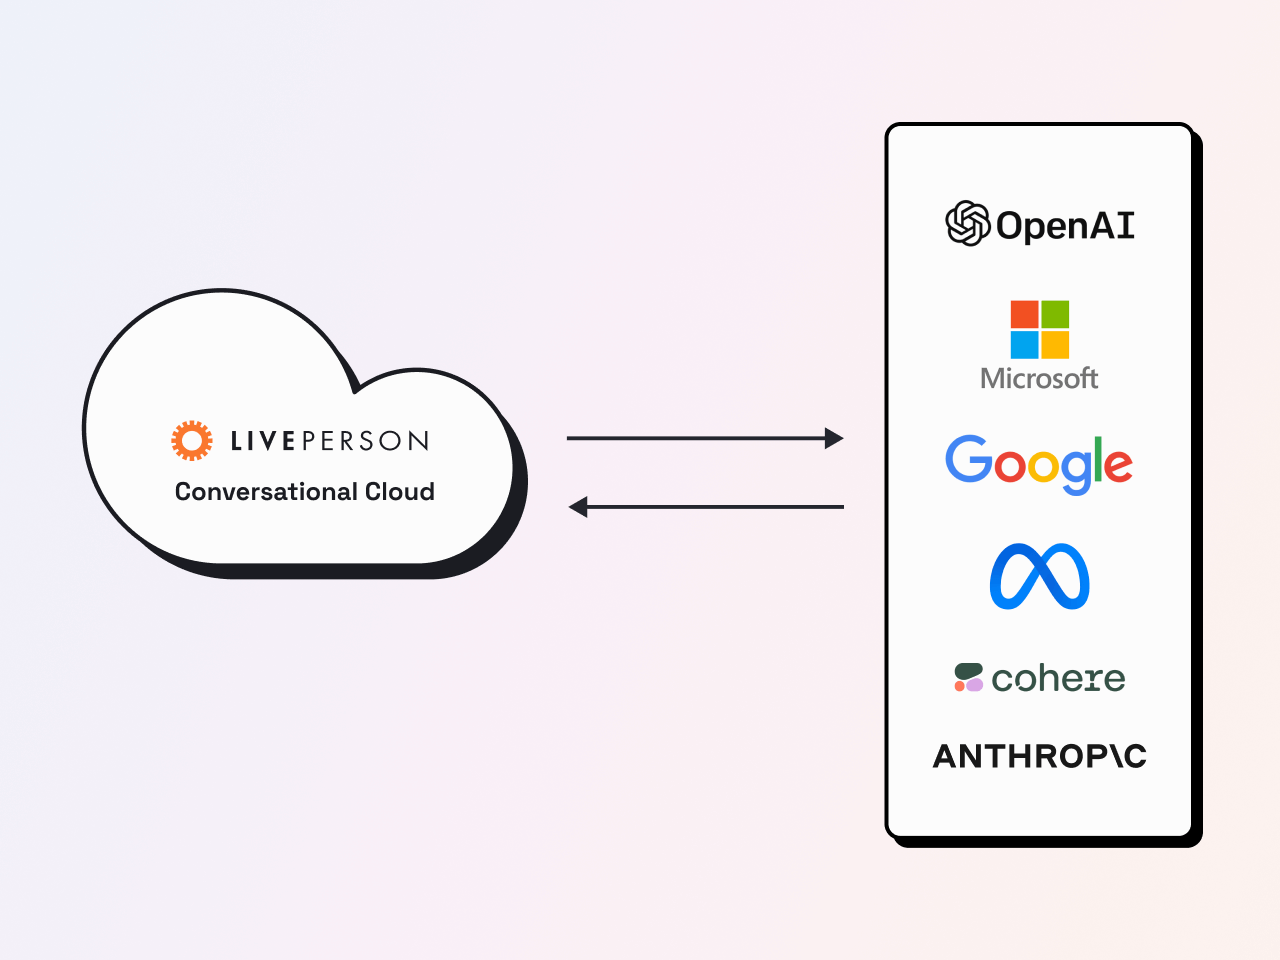 illustration of how LivePerson supports many generative AI models within their platform for various business processes